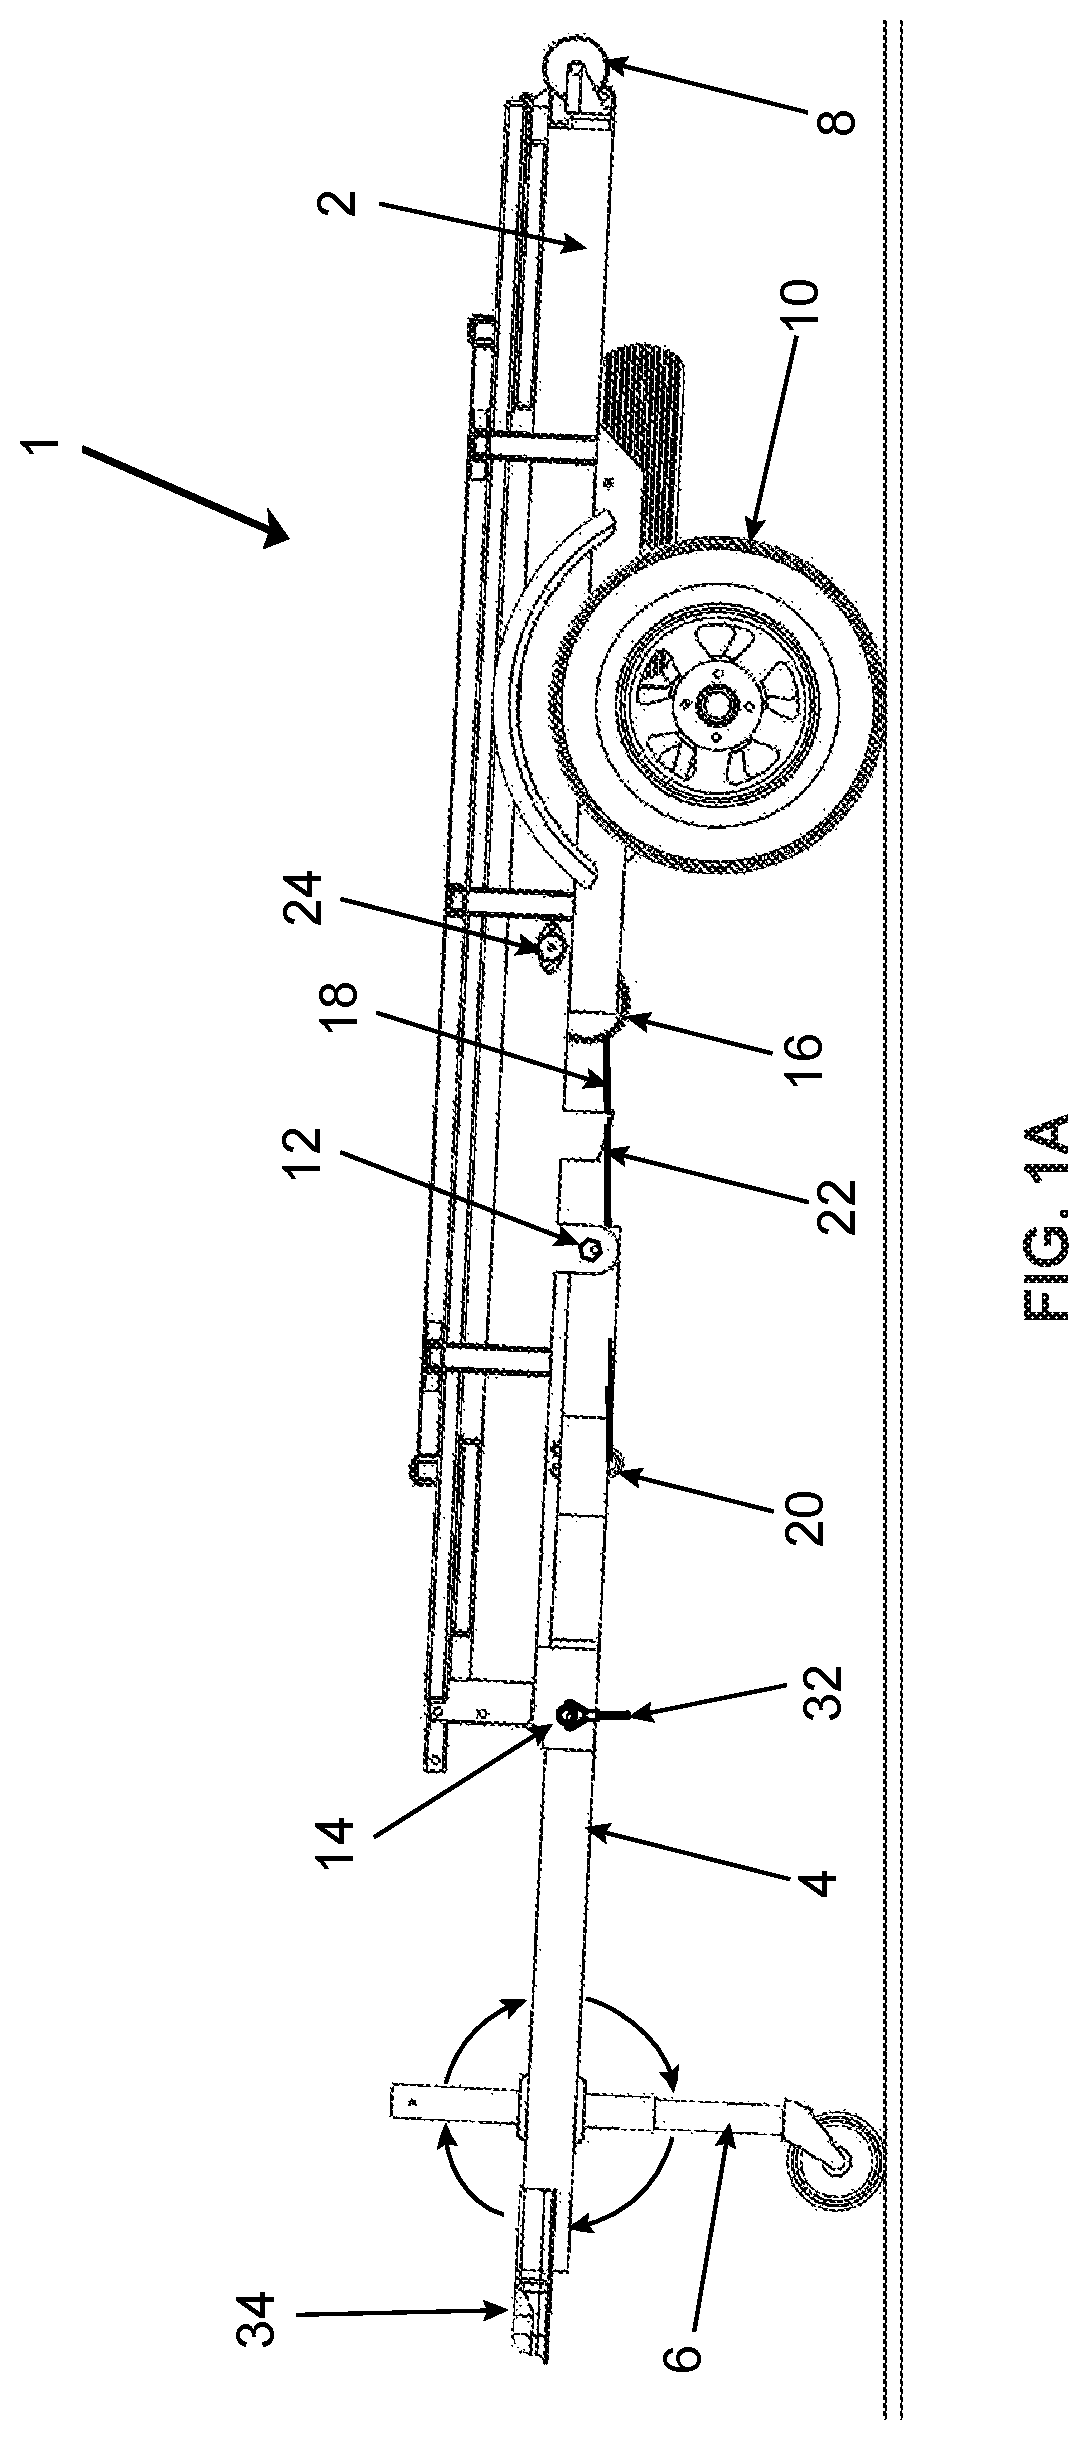 Folding trailer for stowage and methods of use